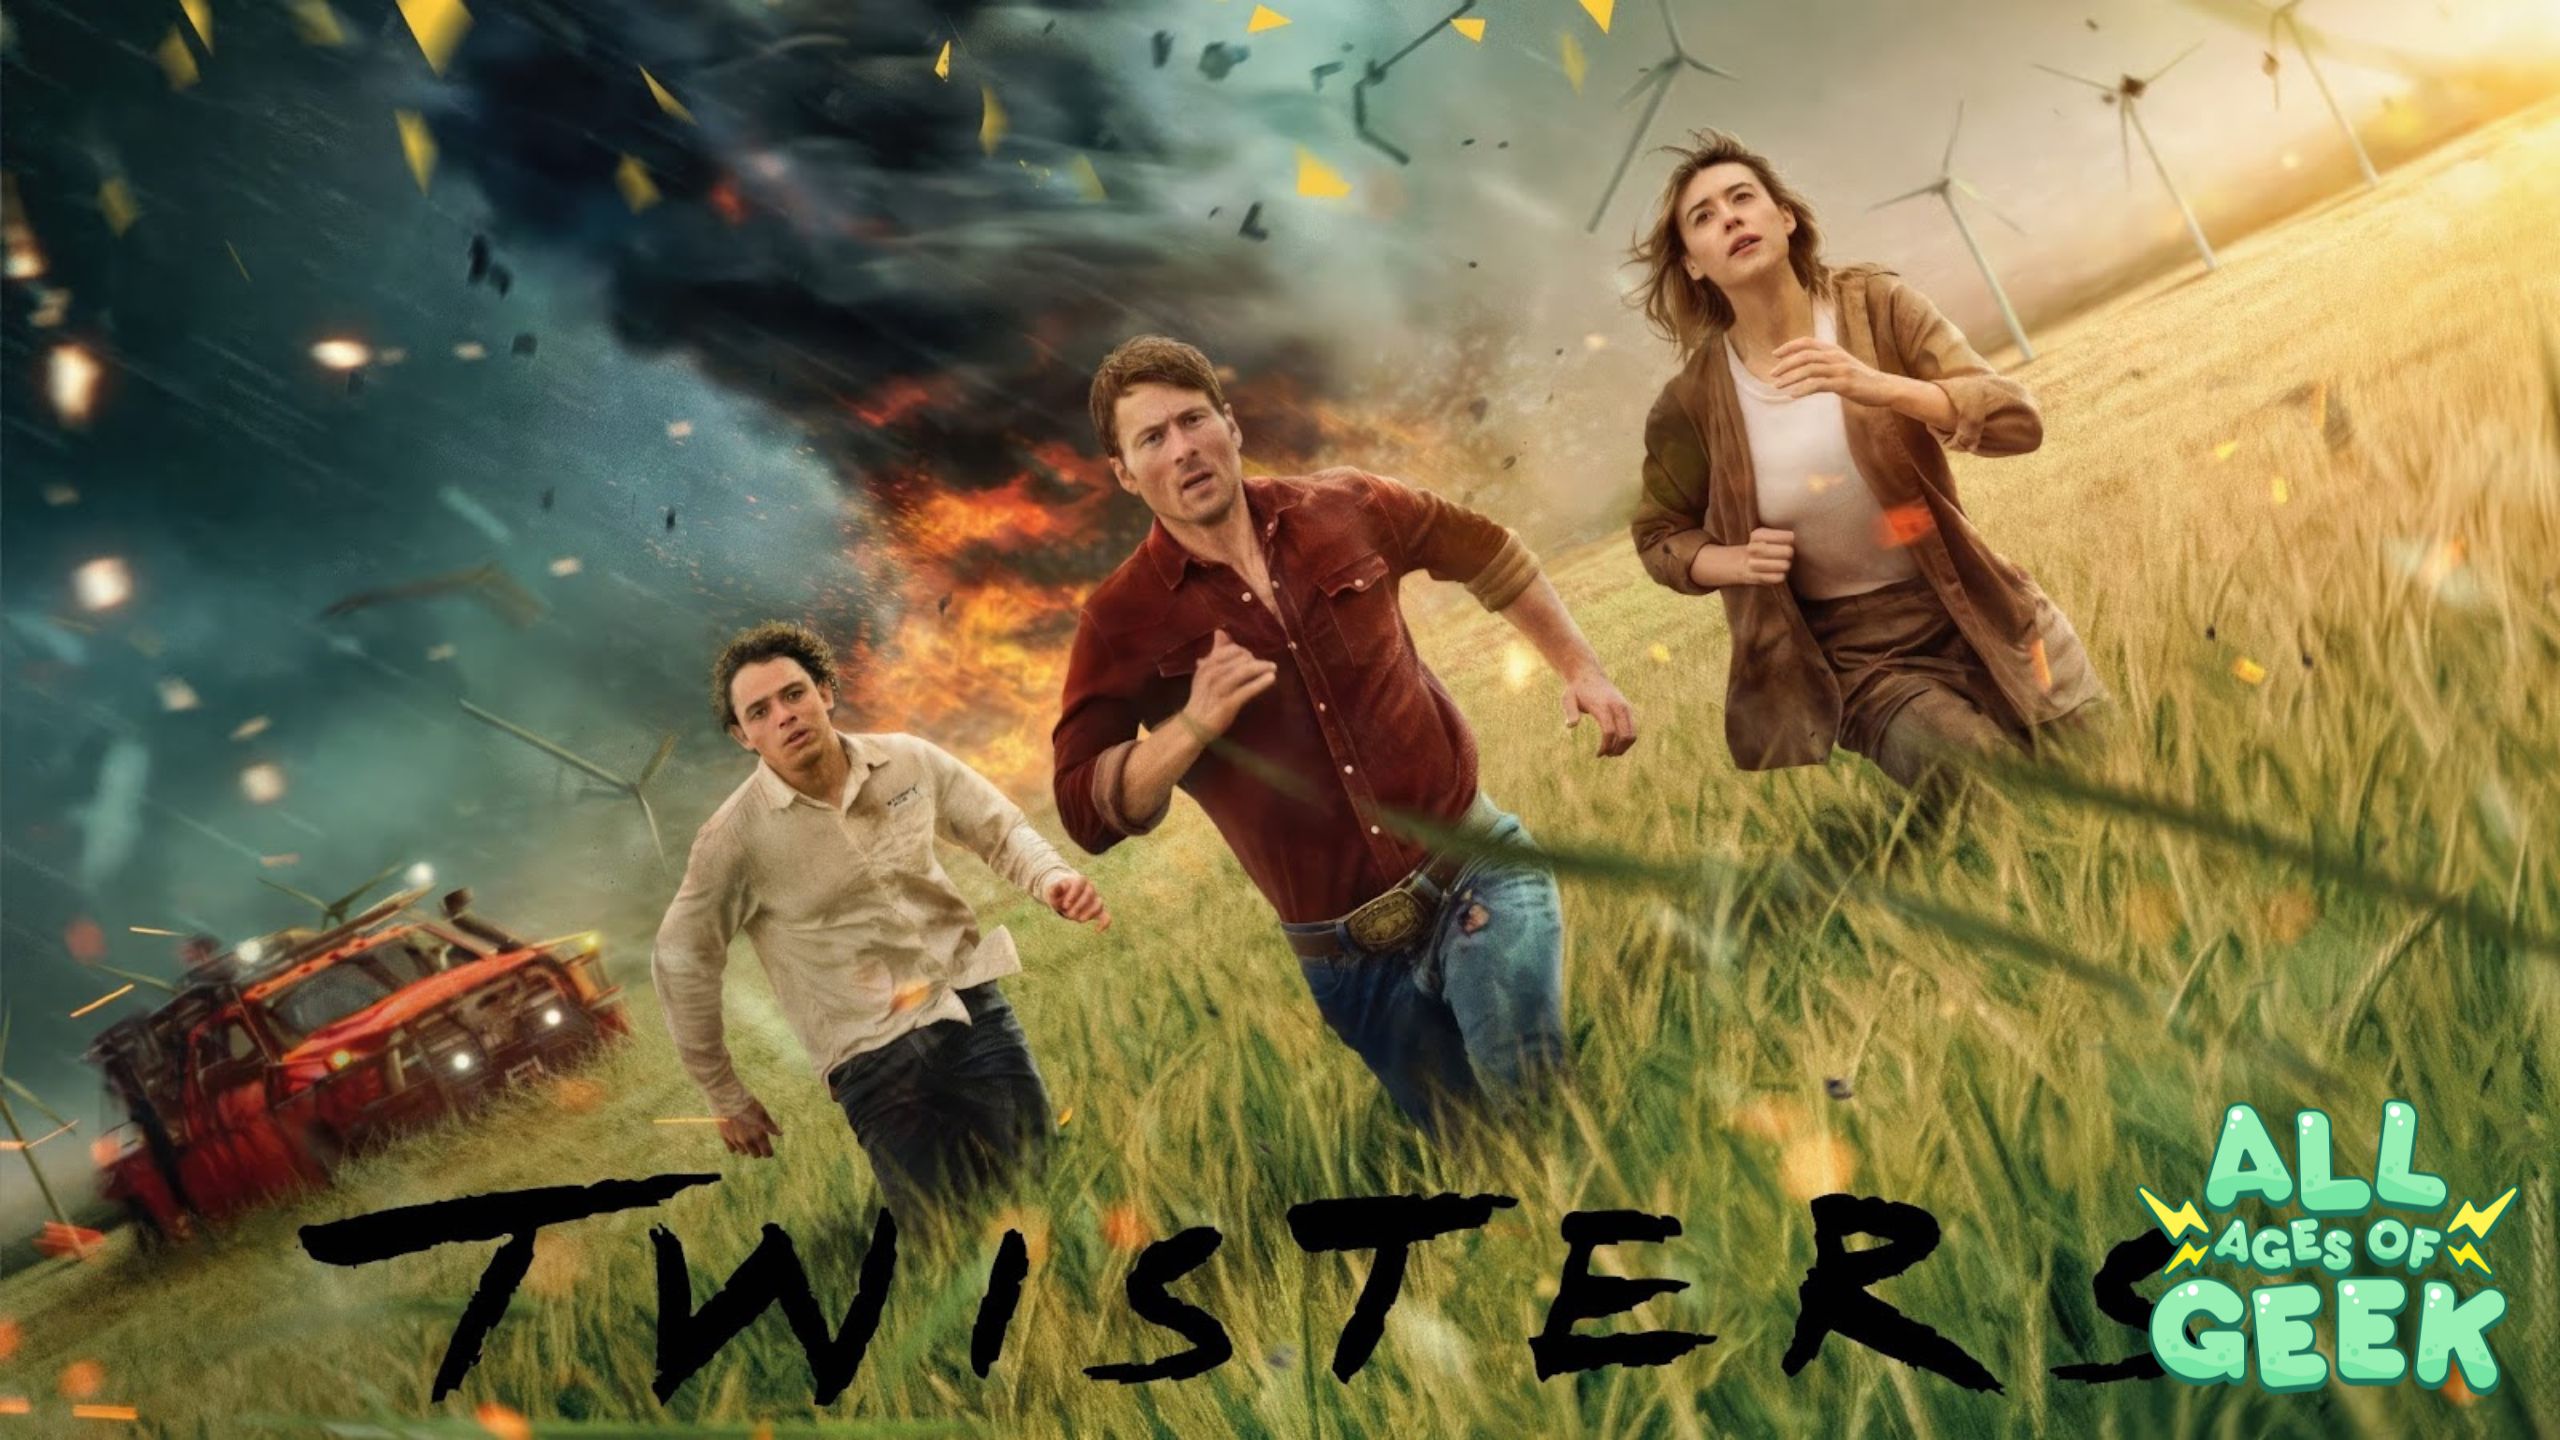 In the image, we see three individuals running through a field with a tornado in the background. The scene appears intense and chaotic, with wind turbines in the distance and a truck seemingly caught in the storm. The title "Twisters" is prominently displayed at the bottom, along with the All Ages of Geek logo in the corner.